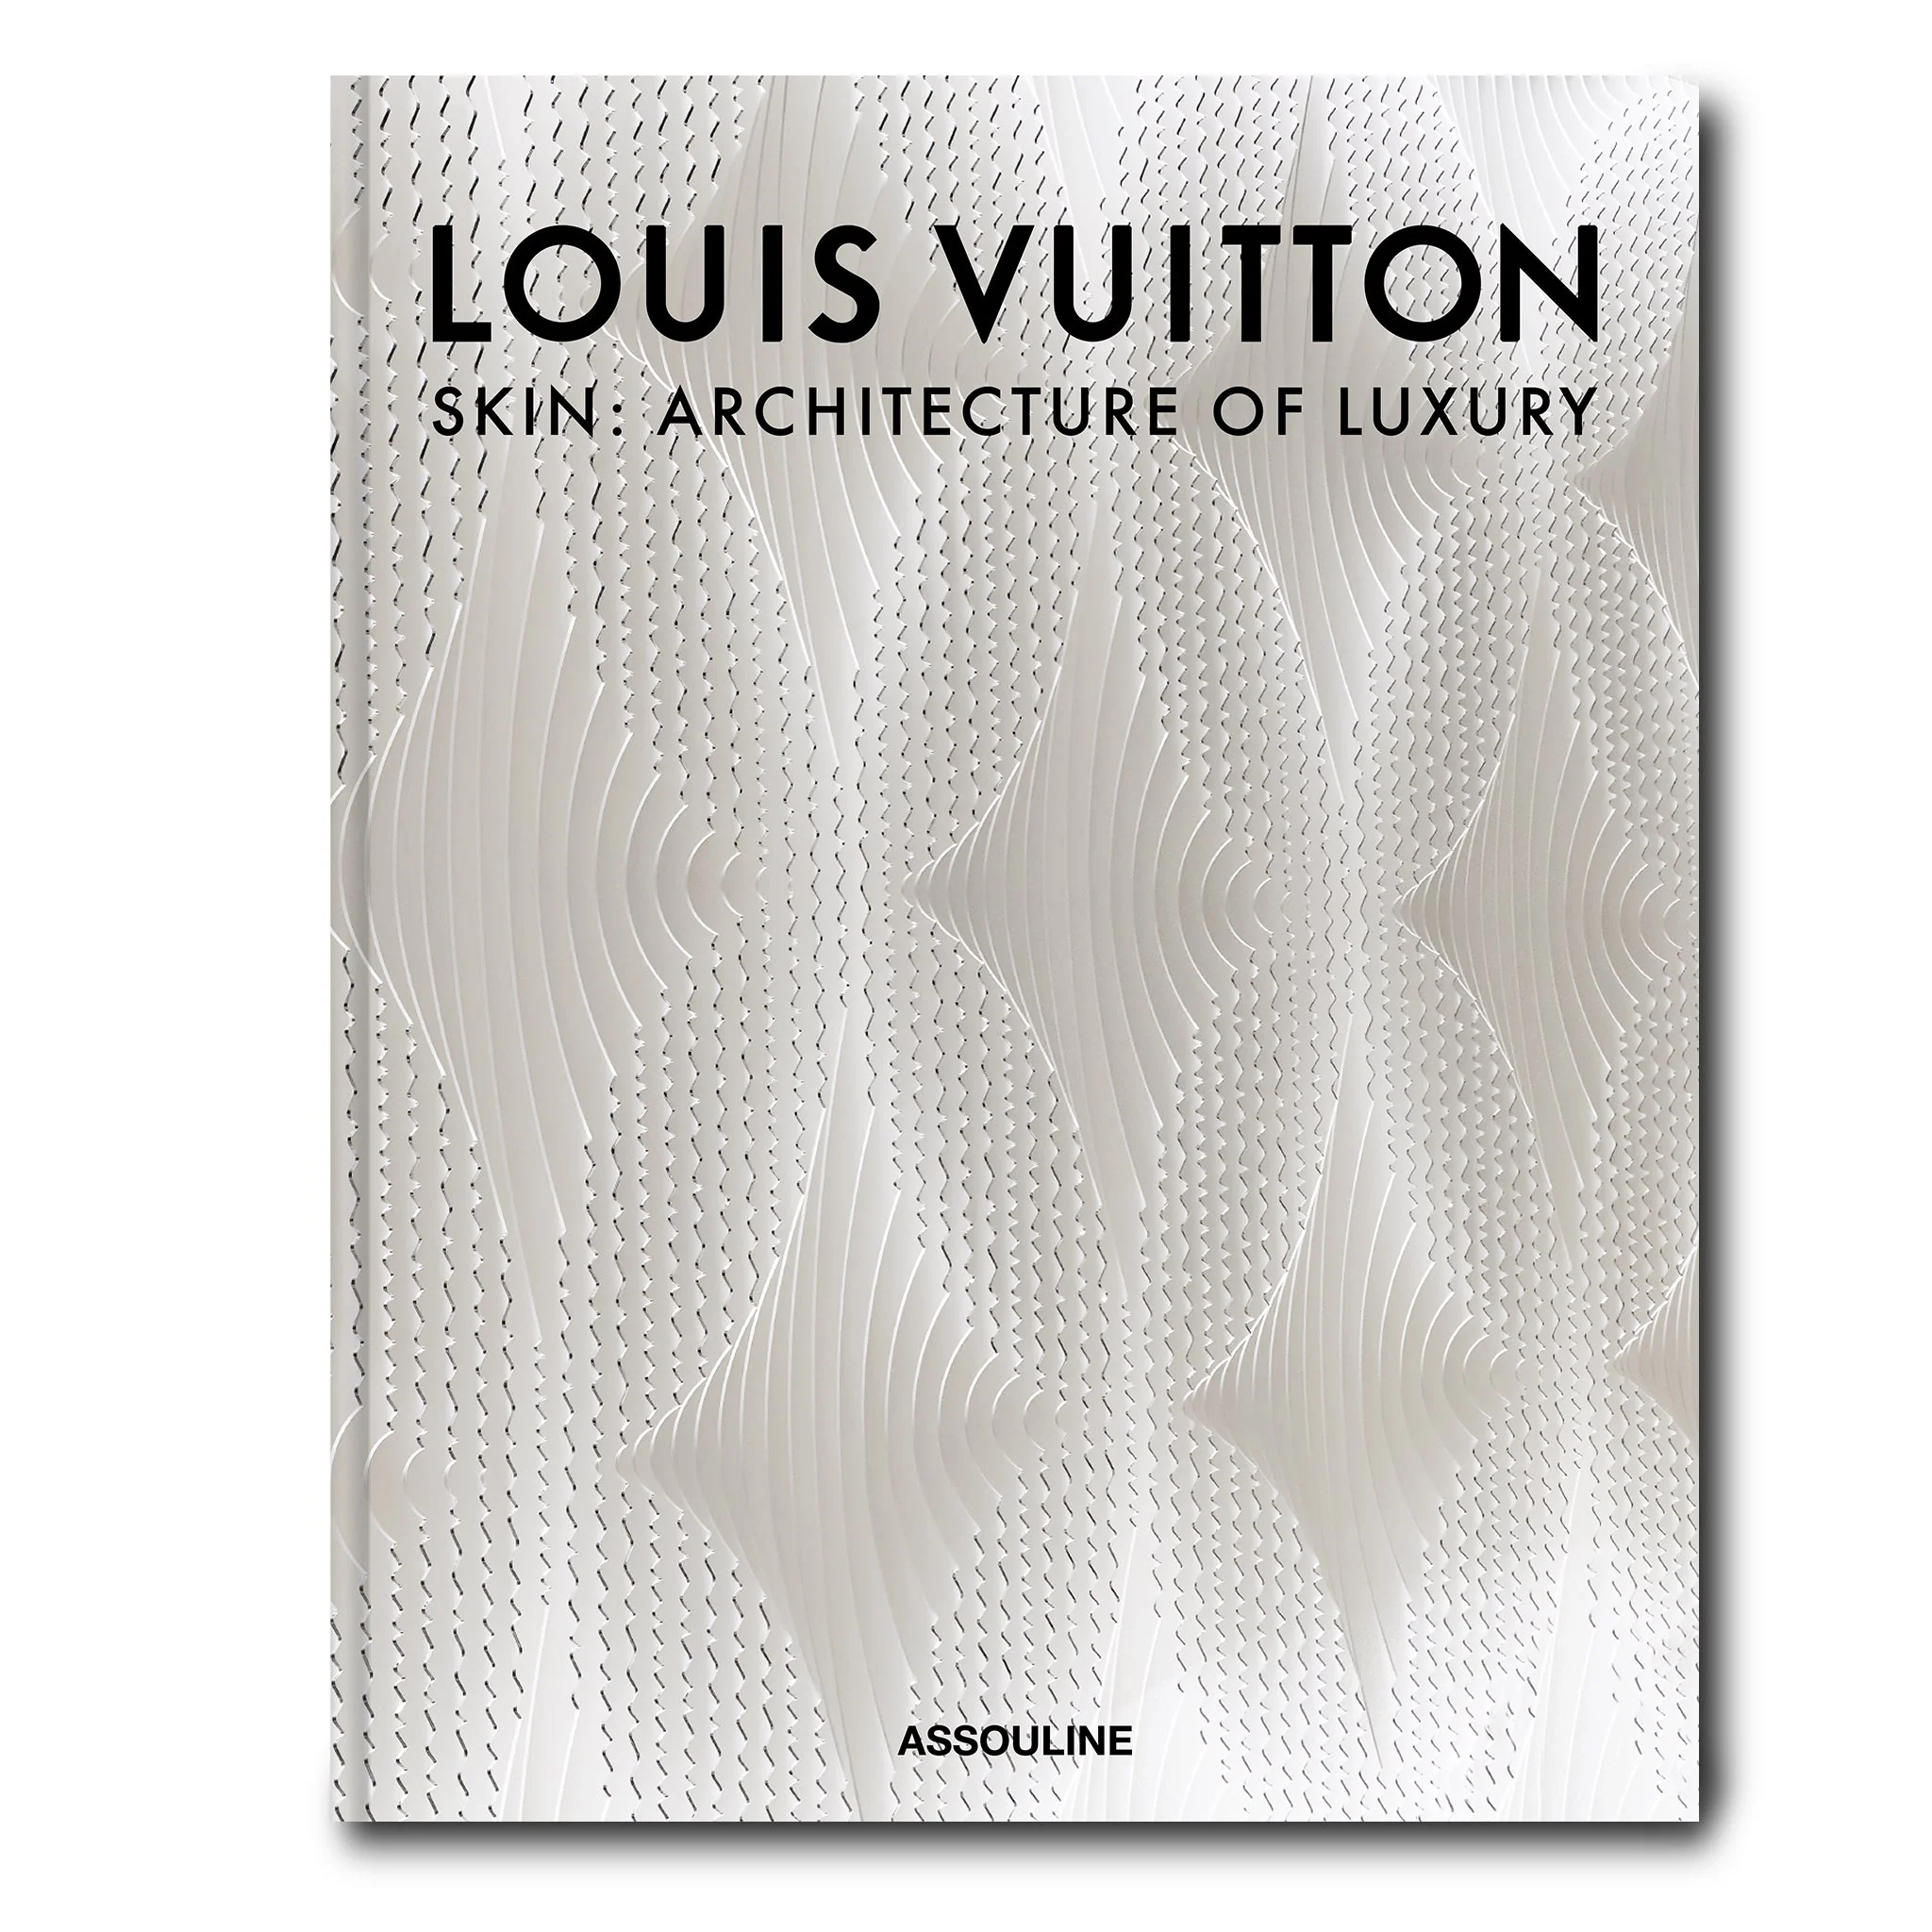 Louis Vuitton Skin: Architecture of Luxury (Beijing Edition) by Paul  Goldberger - Coffee Table Book